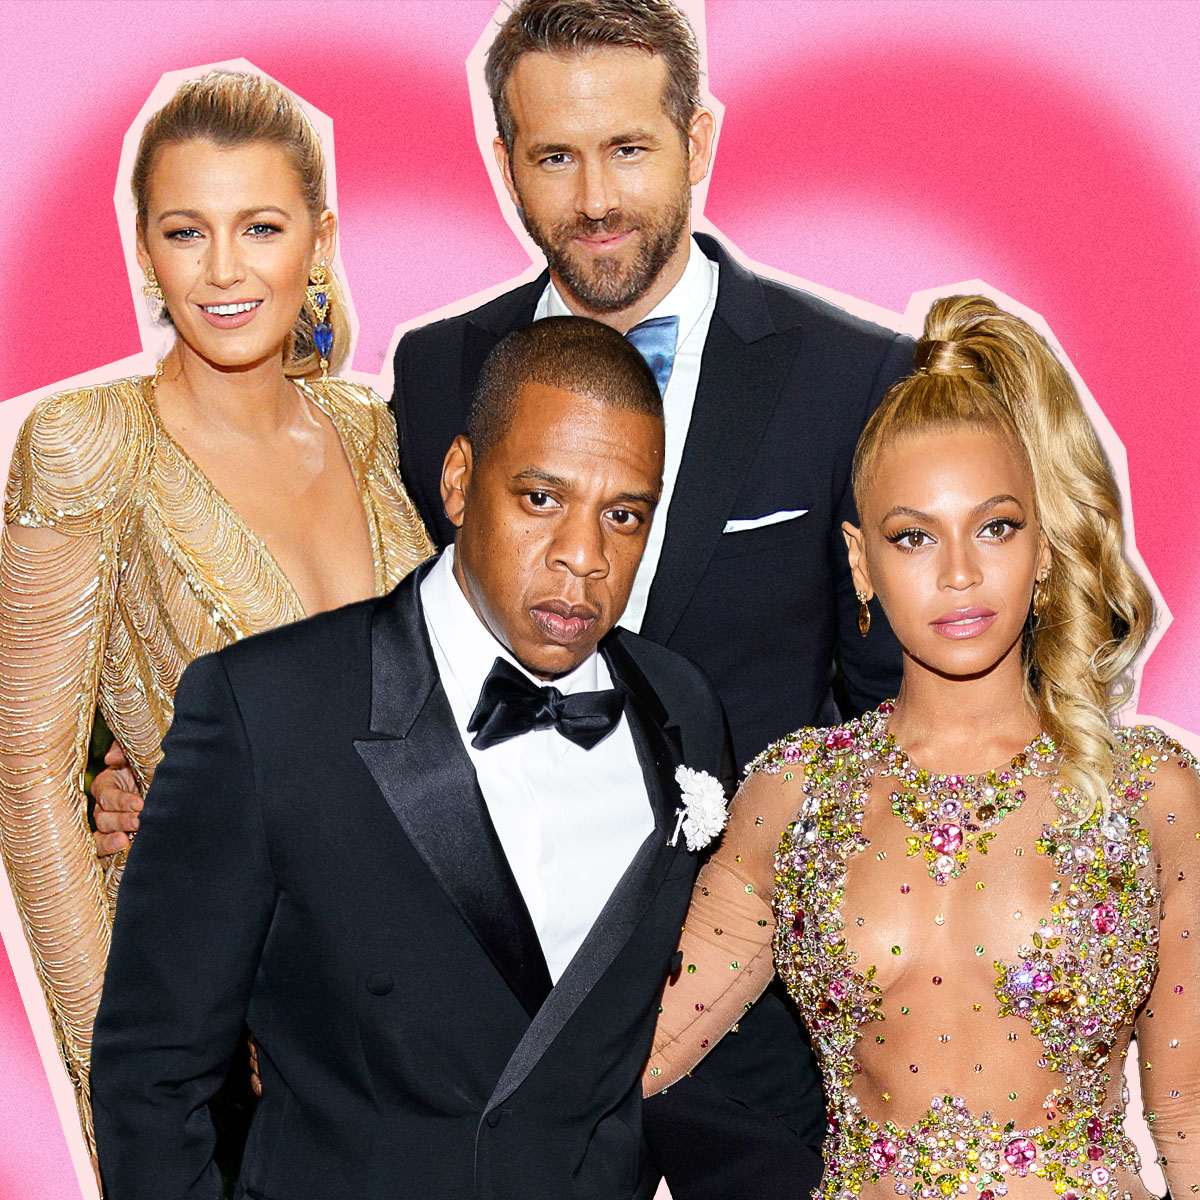 21 Celebrity Couples Who Are High School Sweethearts